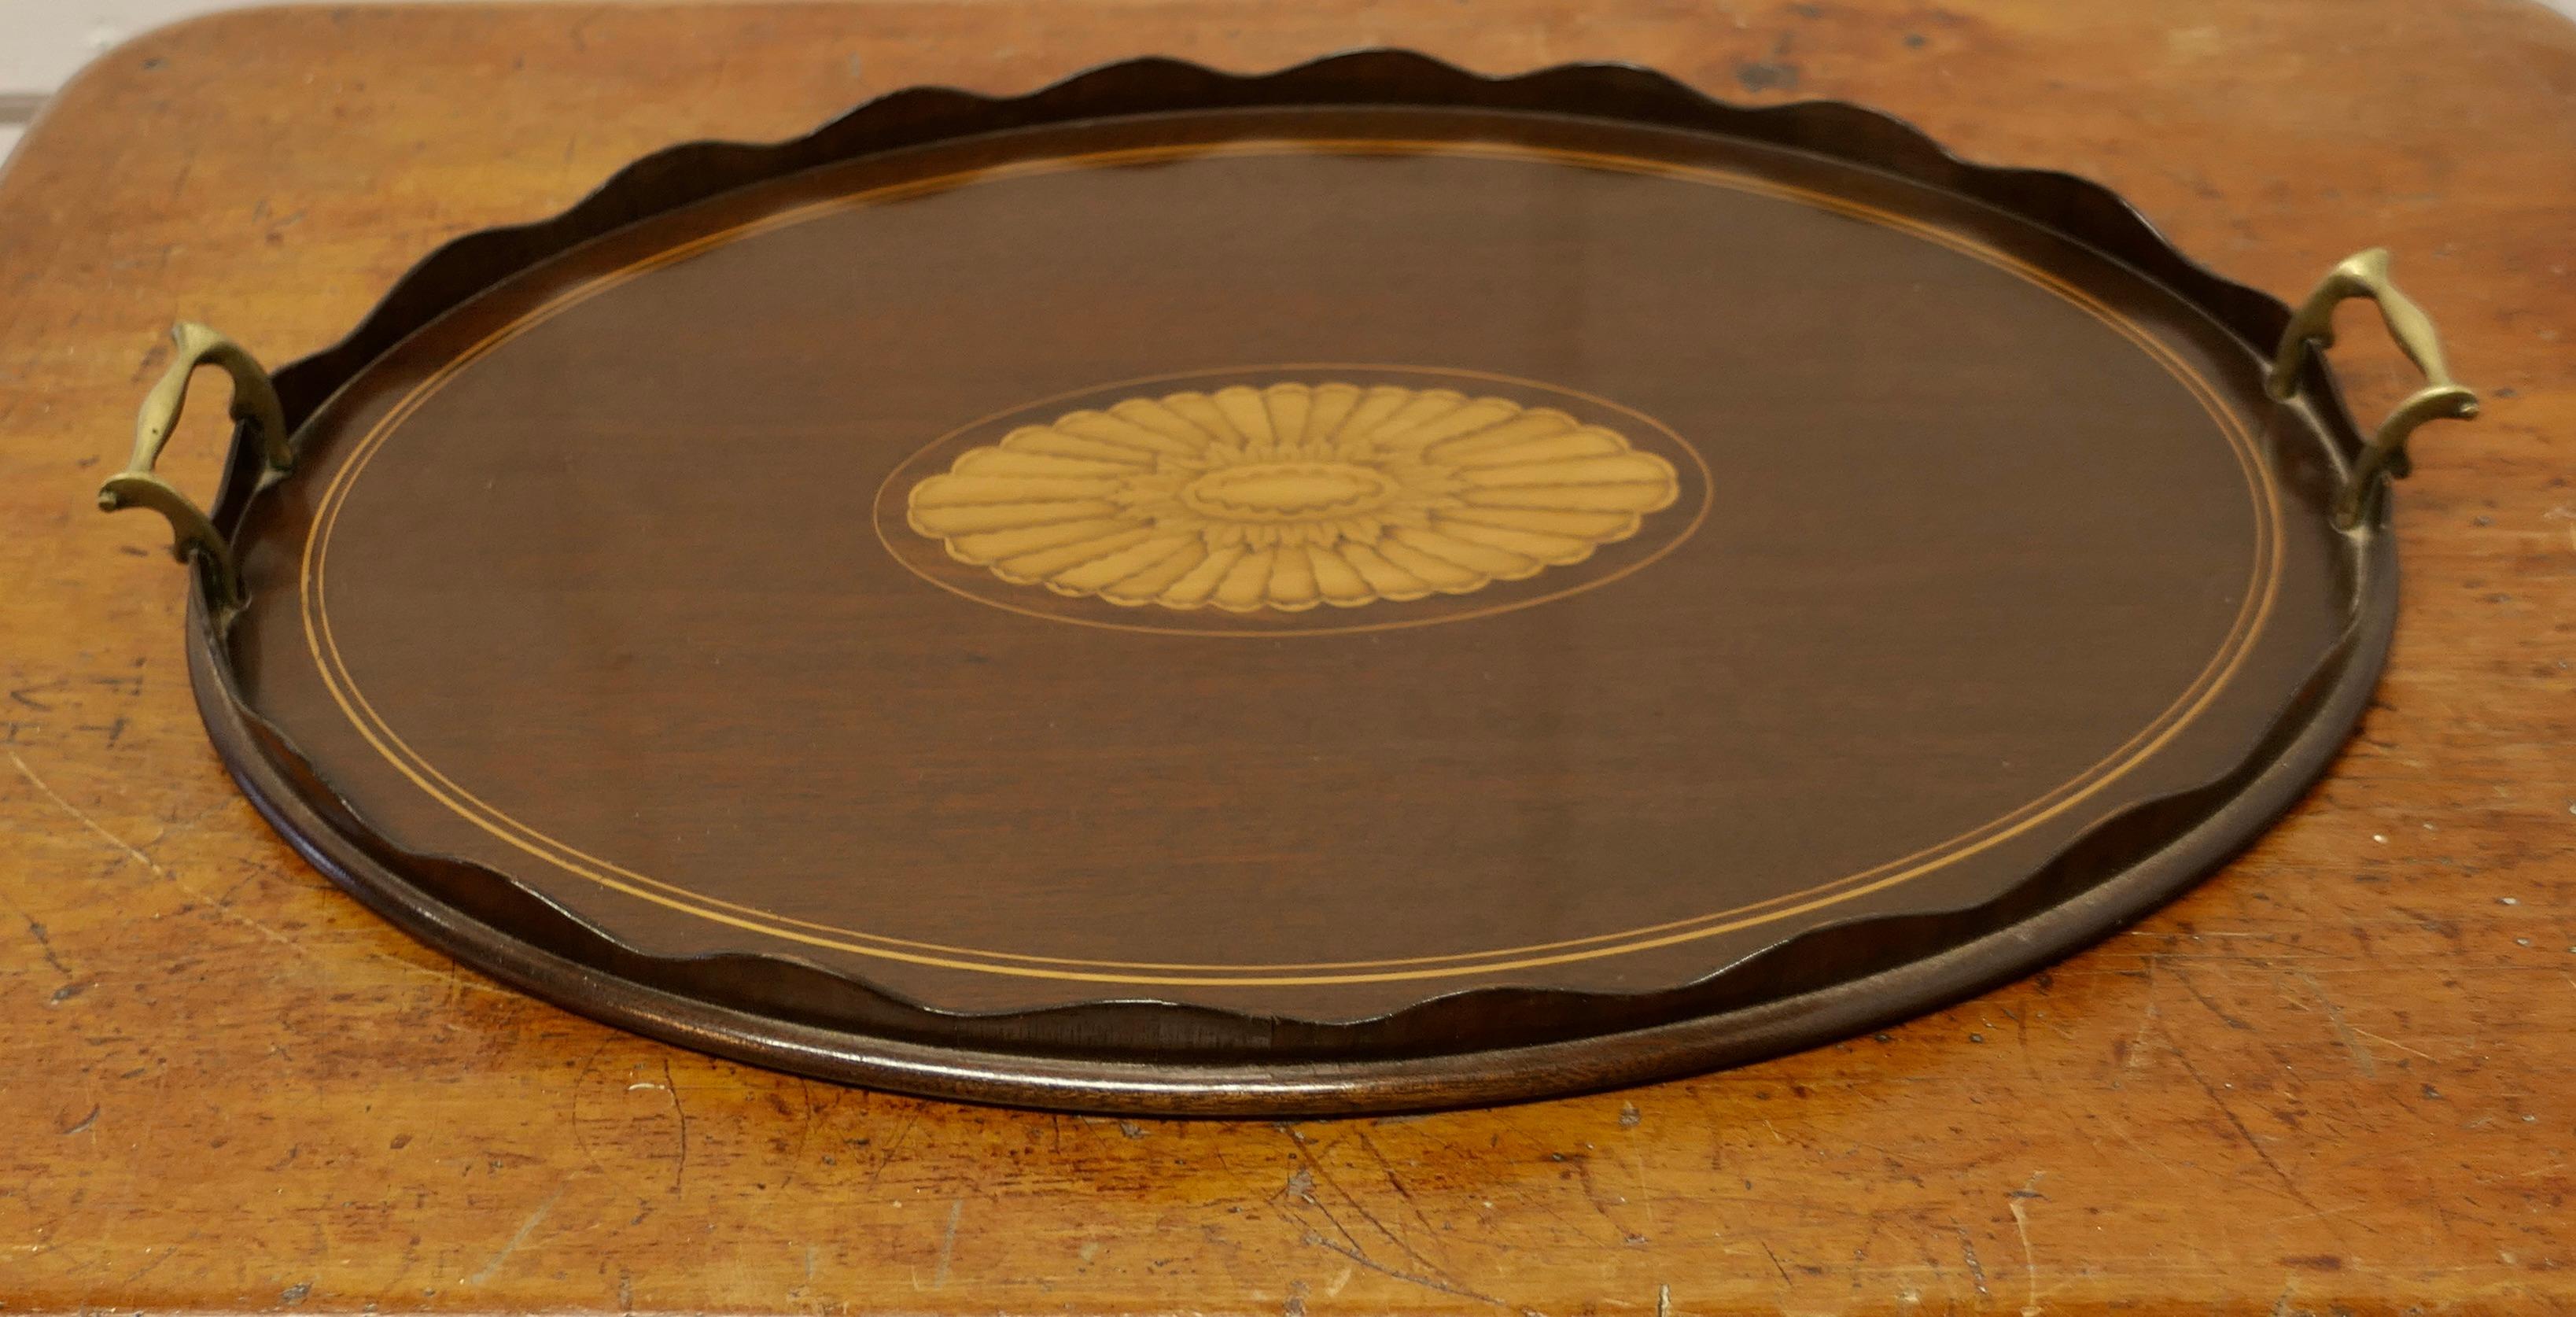 Large Oval Sheraton Style Tray.

This is a superb quality piece 
The tray is oval and decorated in the Sheraton style with a stylised floral inlay at the centre it has a raised scalloped edge and brass handles
This stylish tray has a good colour and